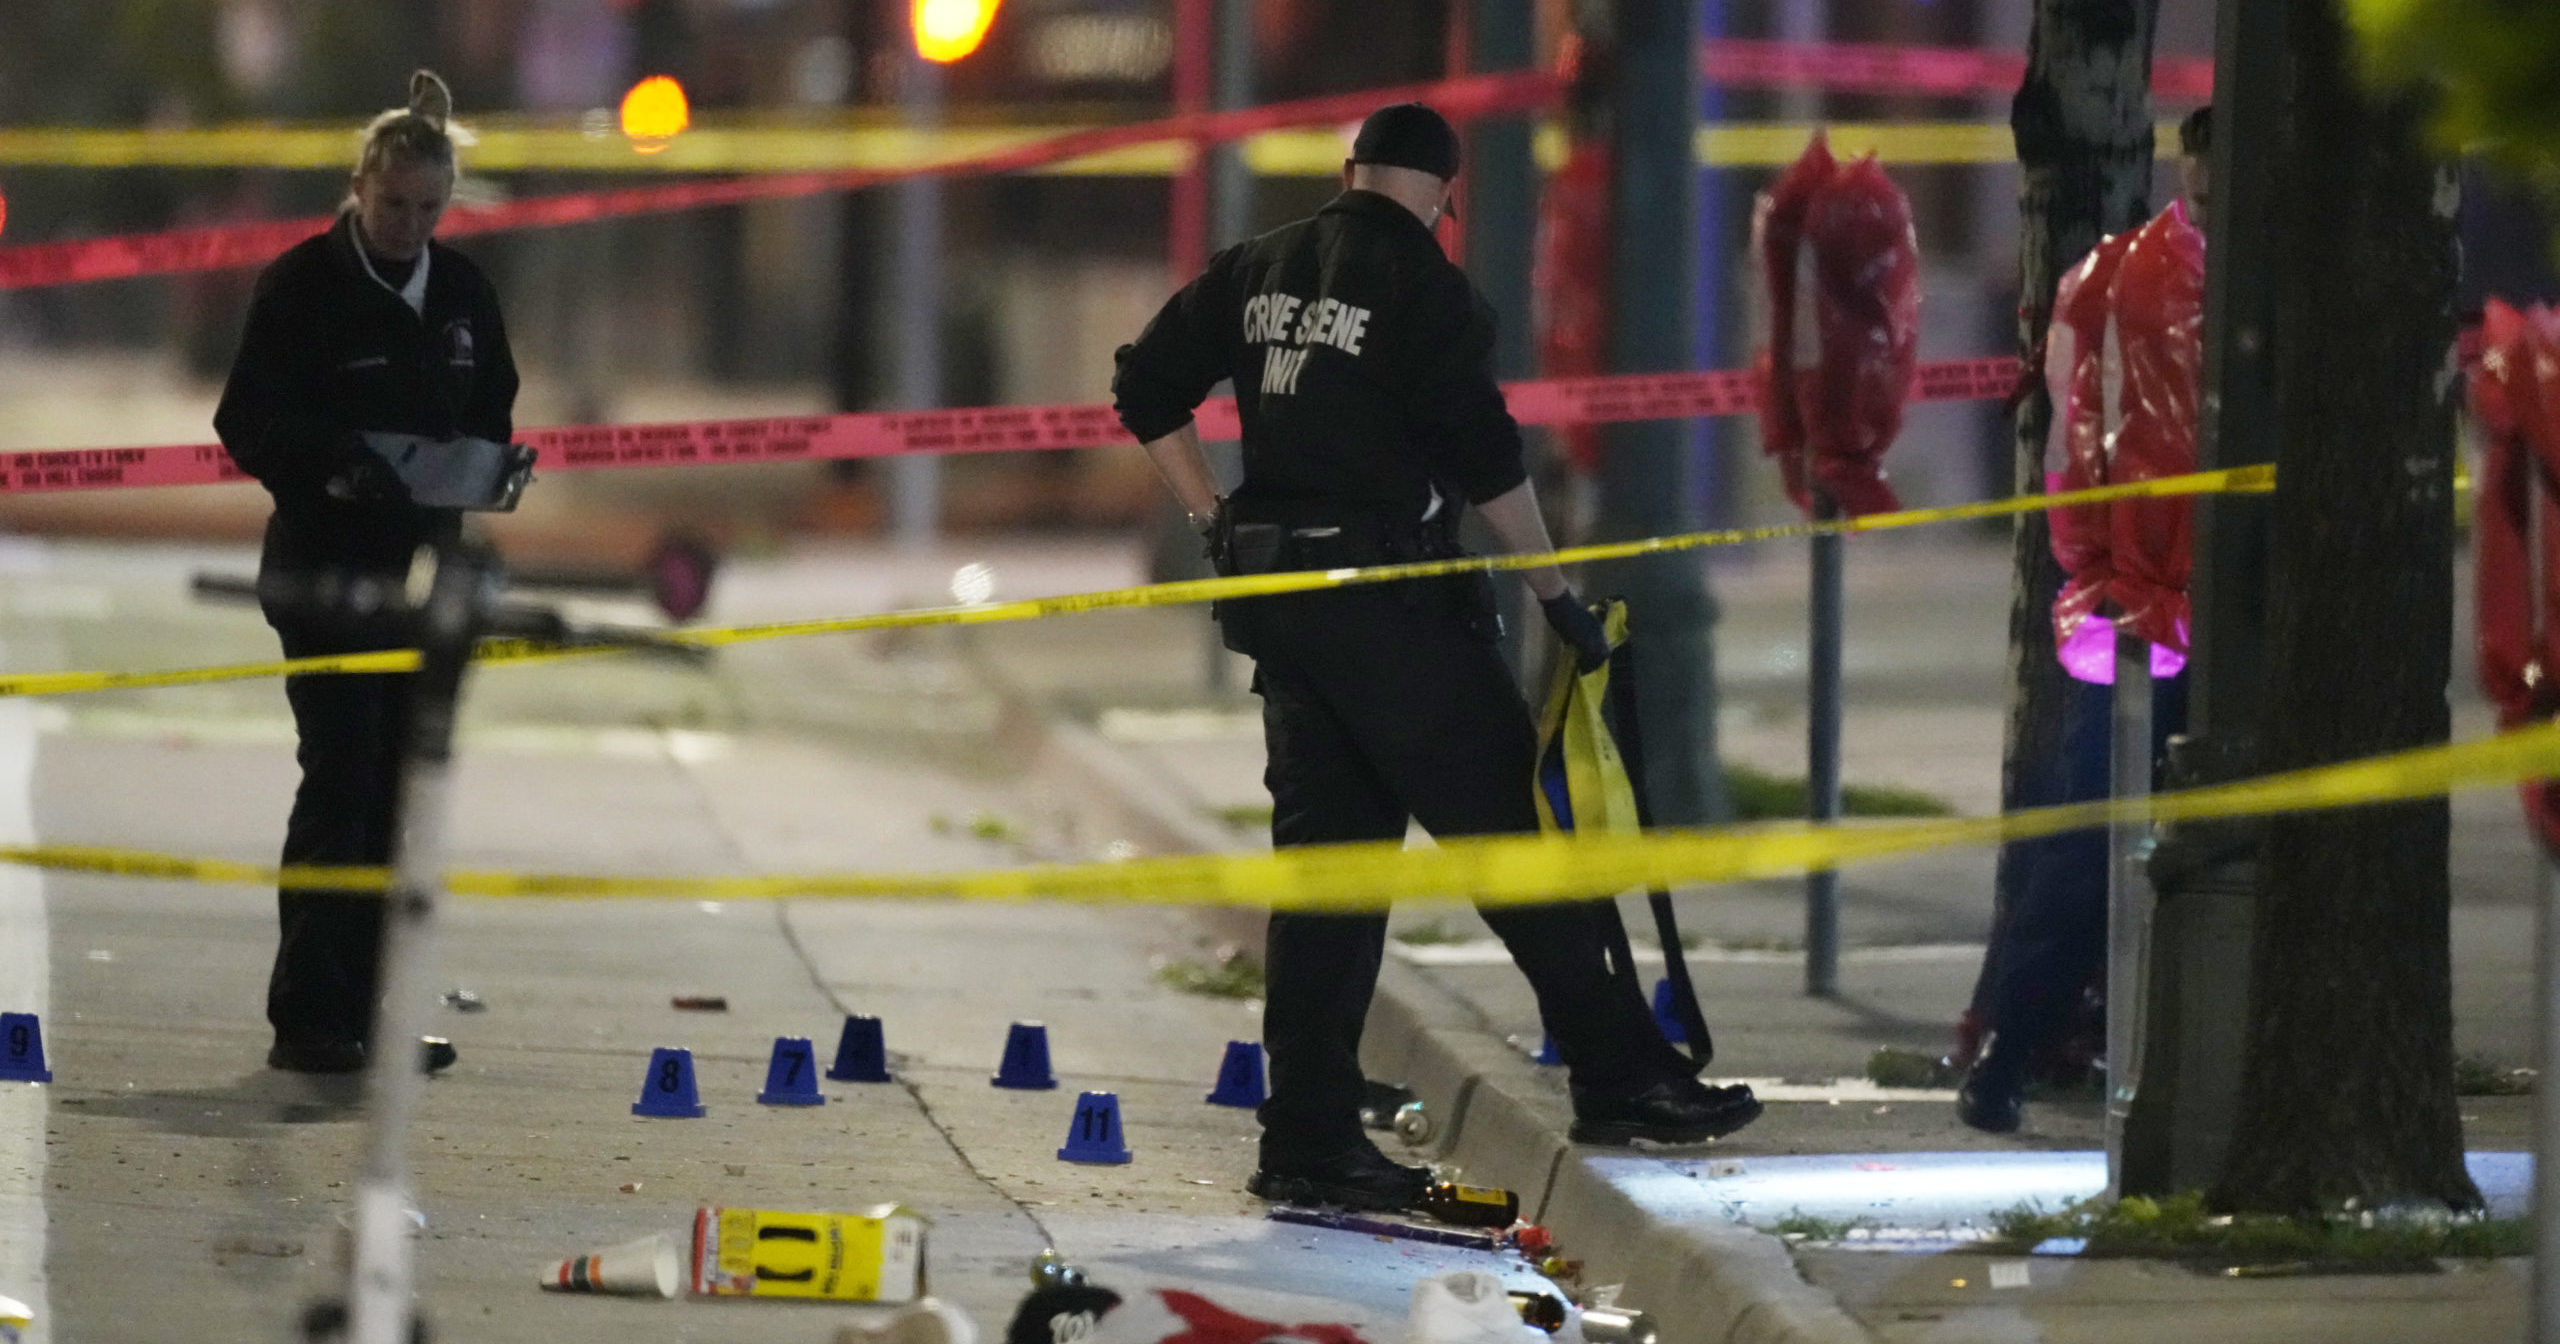 Denver Police Department investigators work the scene of a mass shooting along Market Street between 20th and 21st avenues during a celebration after the Denver Nuggets won the team's first NBA Championship early Tuesday.